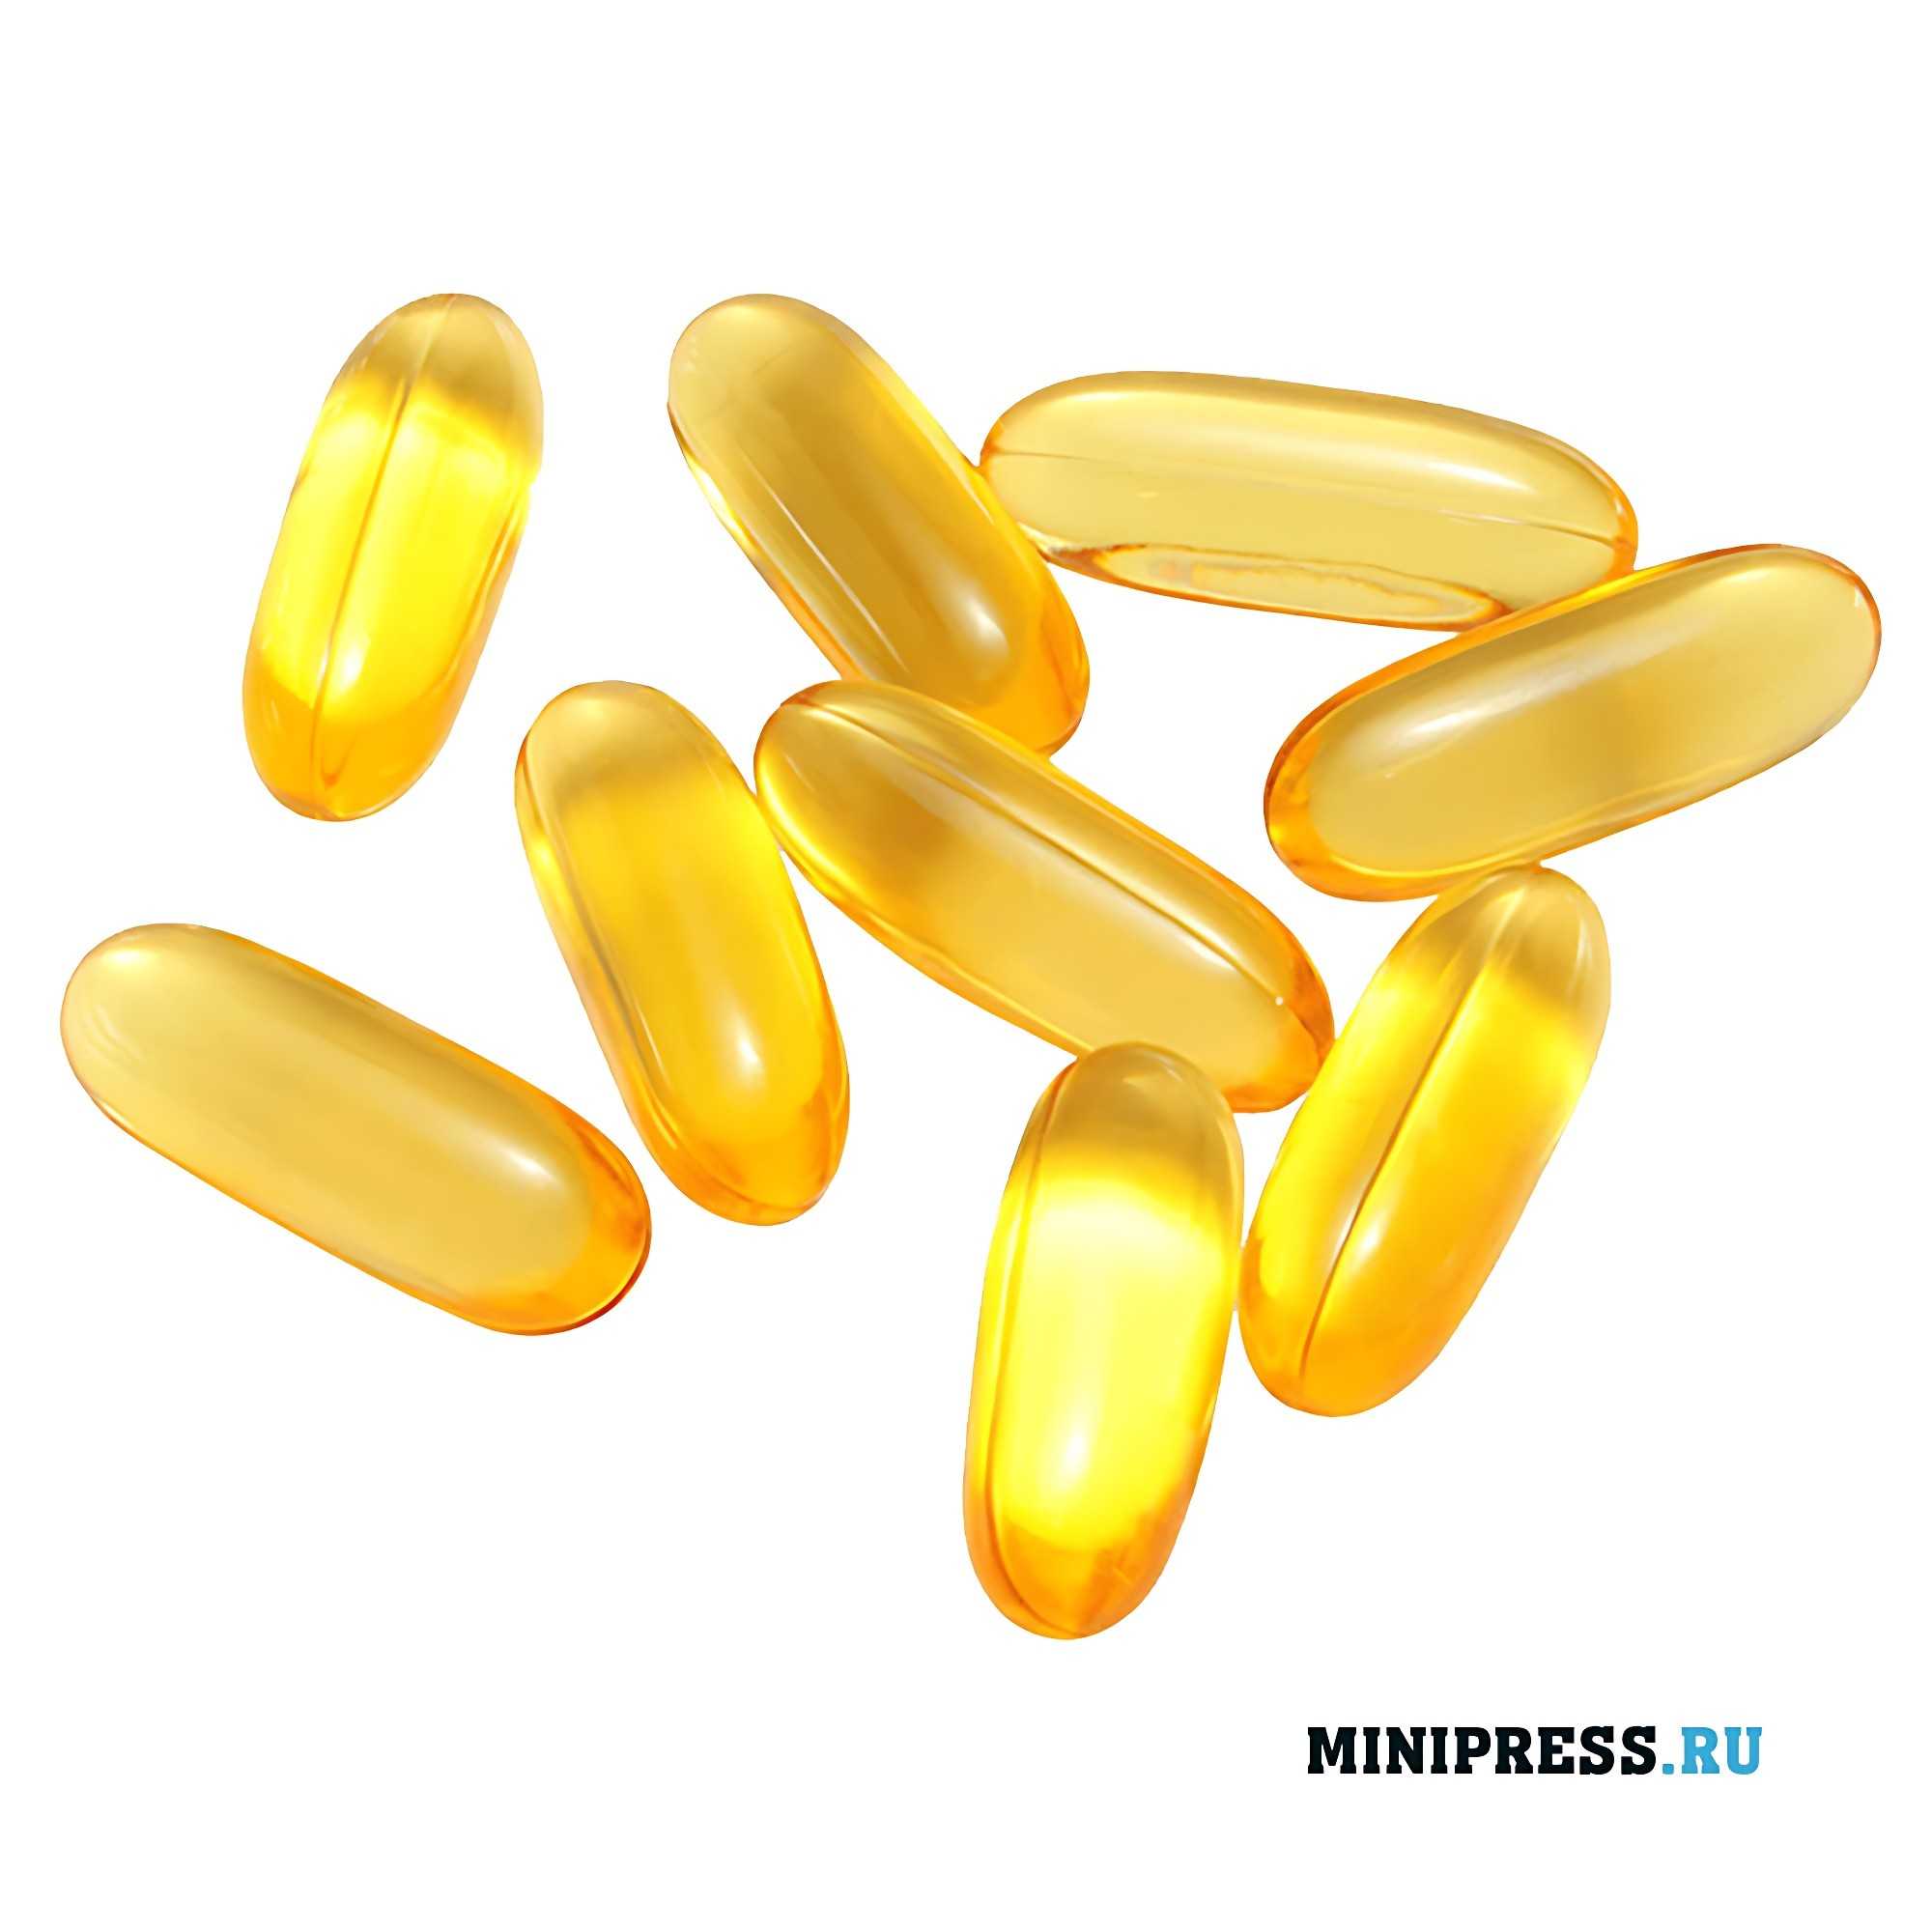 Microcapsules with oil